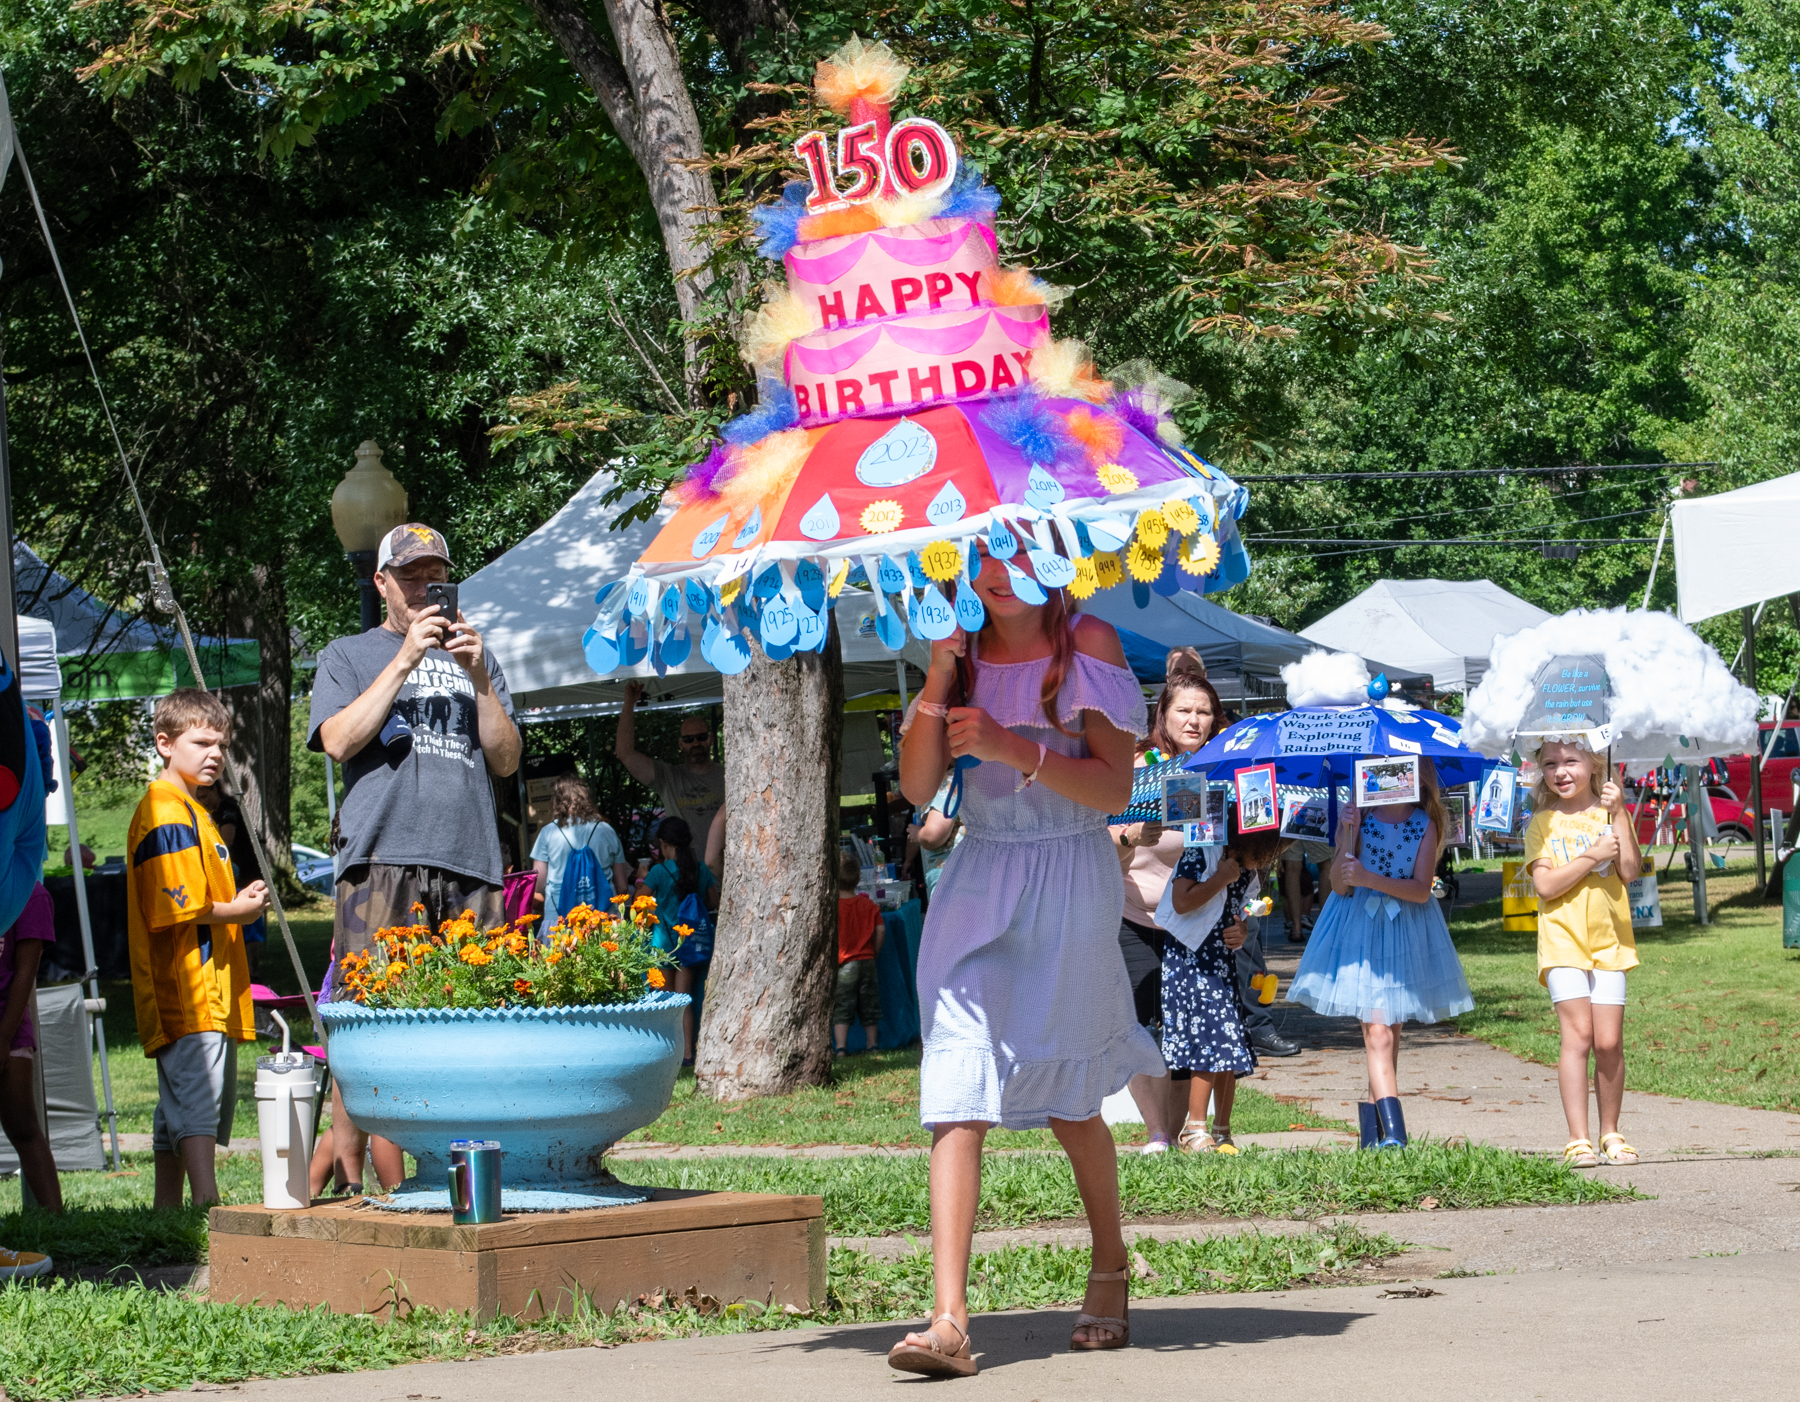 Photograph of a female child carrying a decorated umbrella to look like a cake celebrating the 150th birthday of Rain Day in Waynesburg, Pennsylvania.